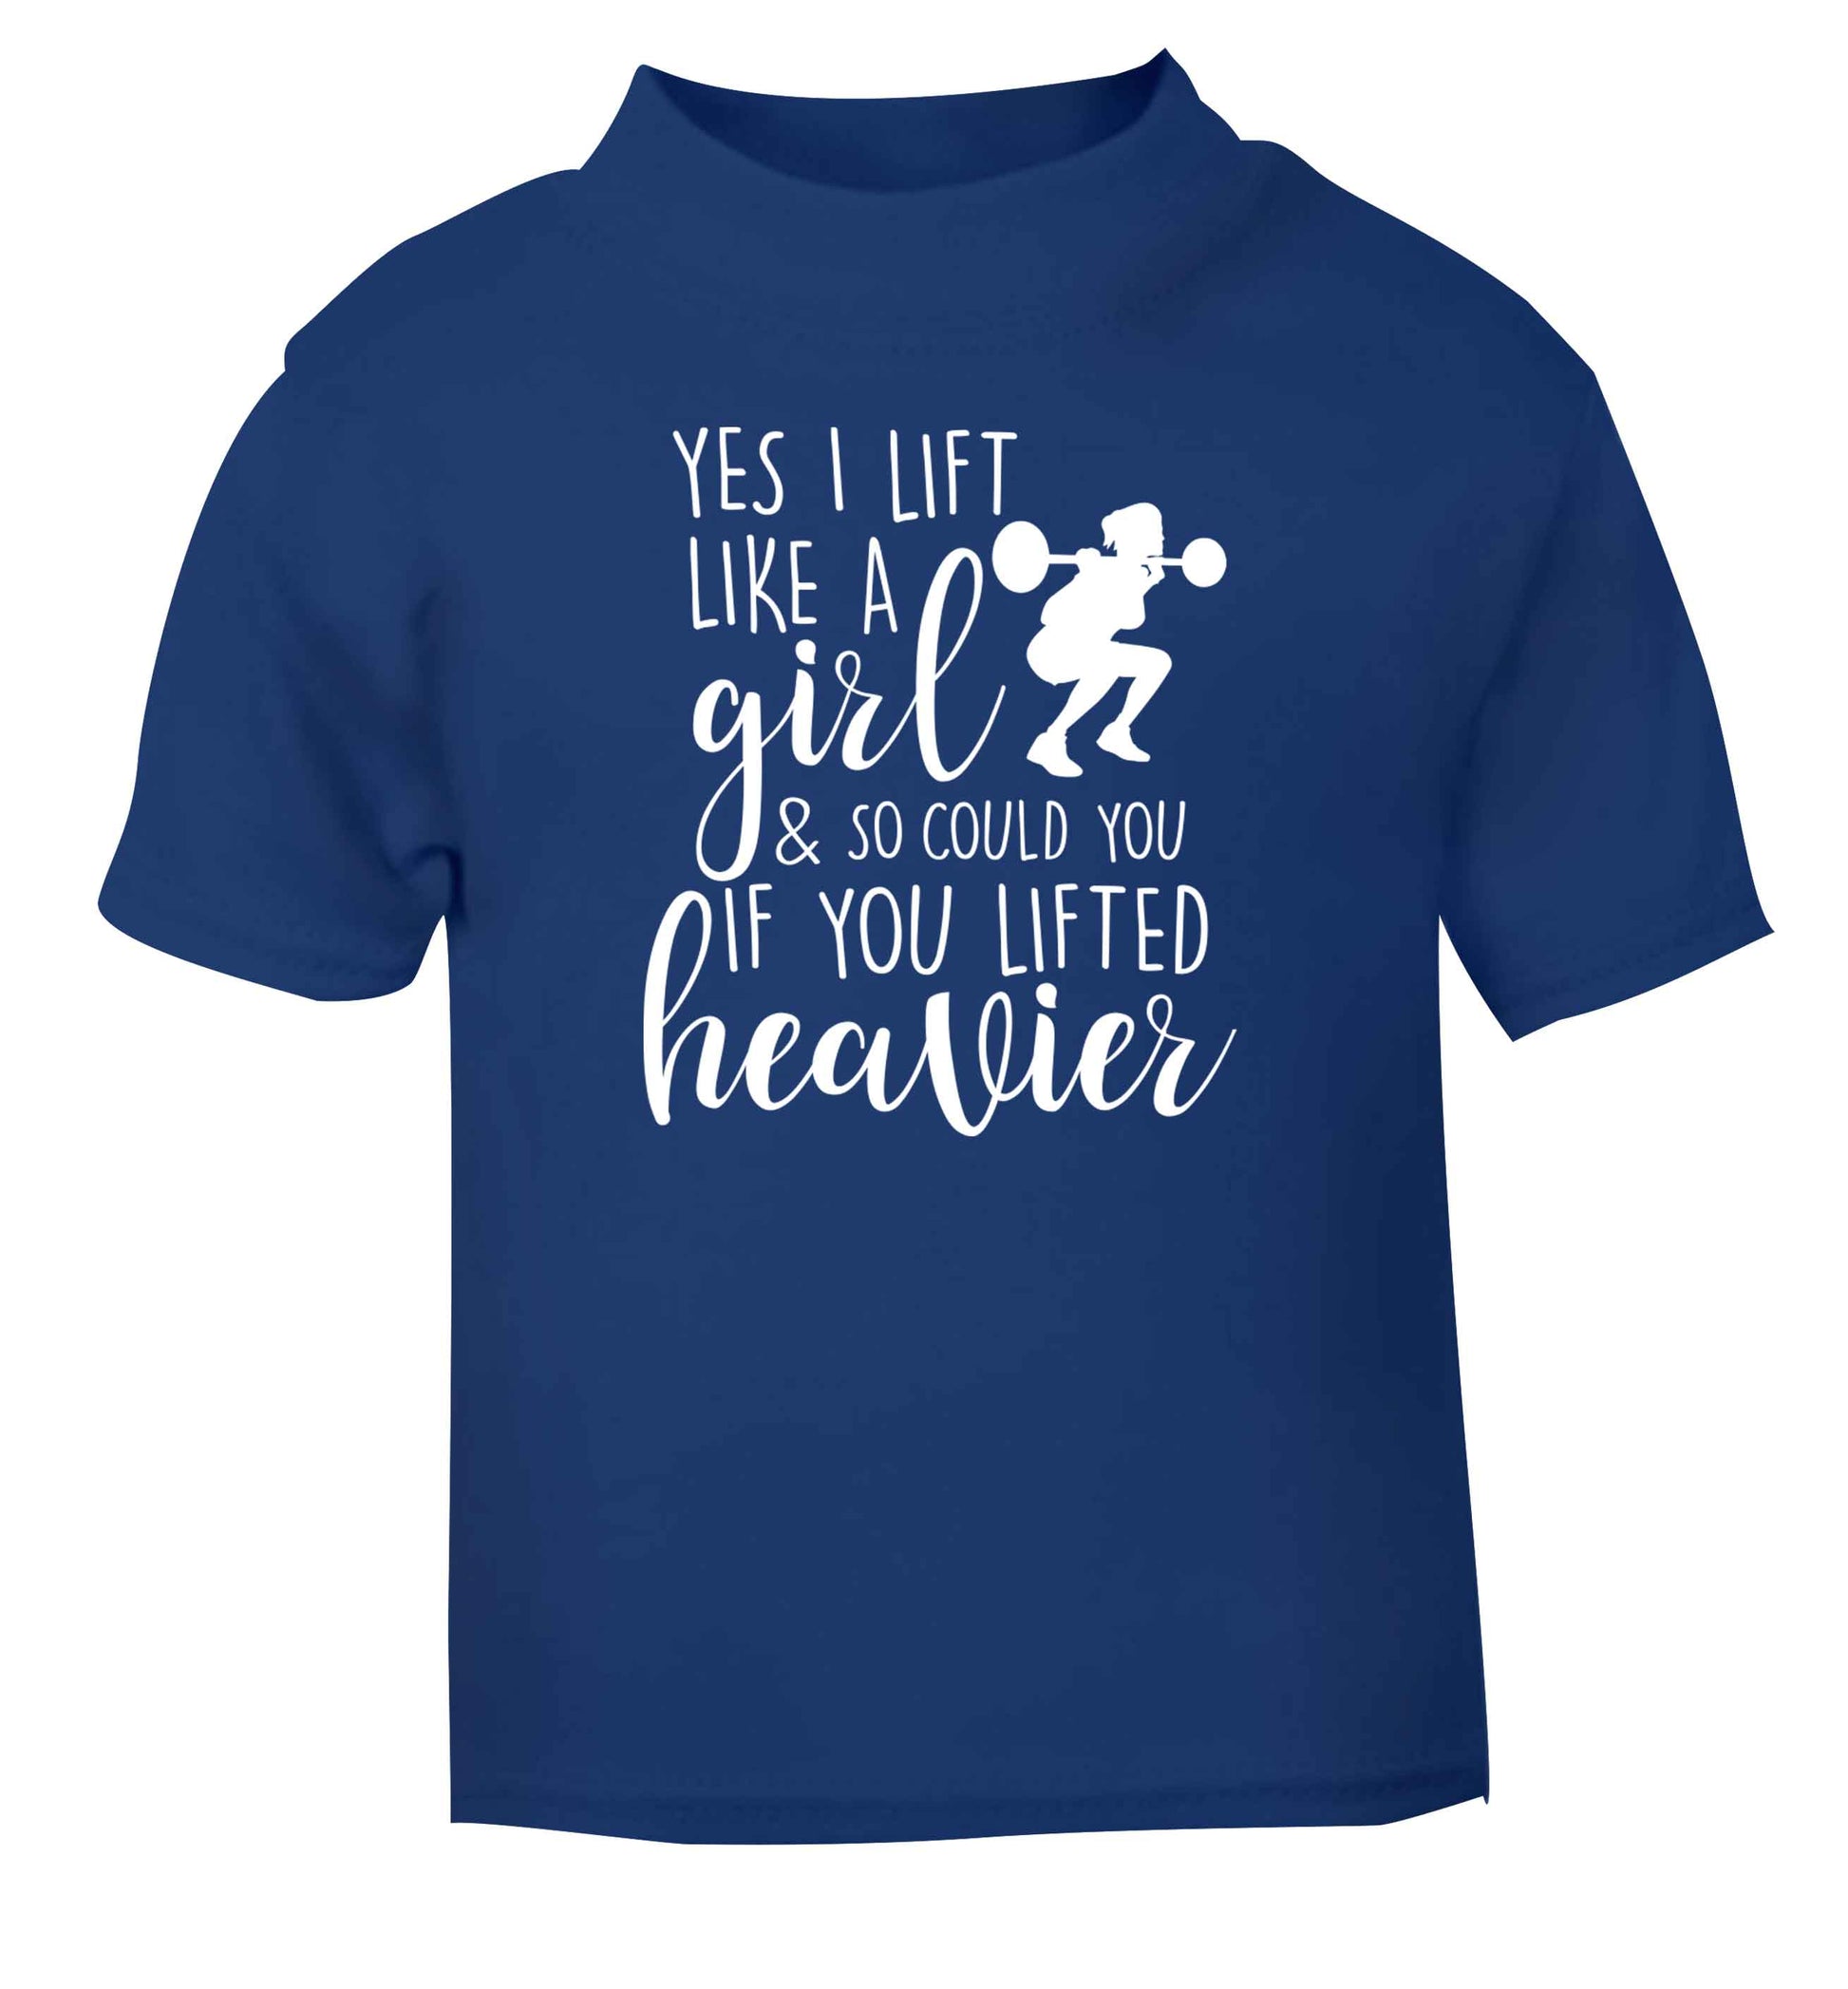 Yes I lift like a girl and so could you if you lifted heavier blue Baby Toddler Tshirt 2 Years